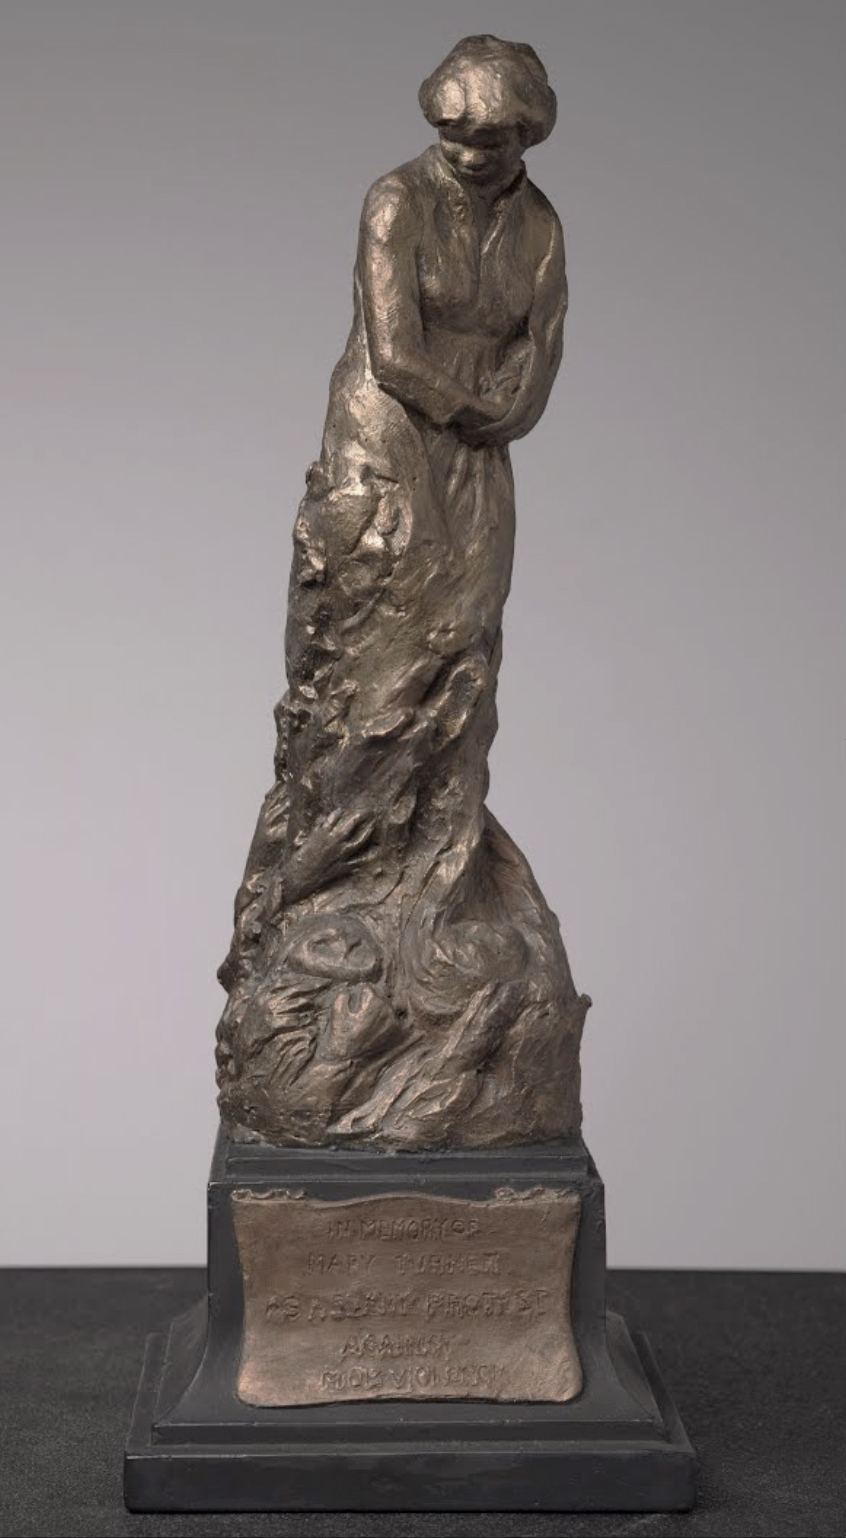 Meta Warrick Fuller, In Memory of Mary Turner: As a Silent Protest Against Mob Violence, 1919, painted plaster (Museum of African American History, Boston & Nantucket)